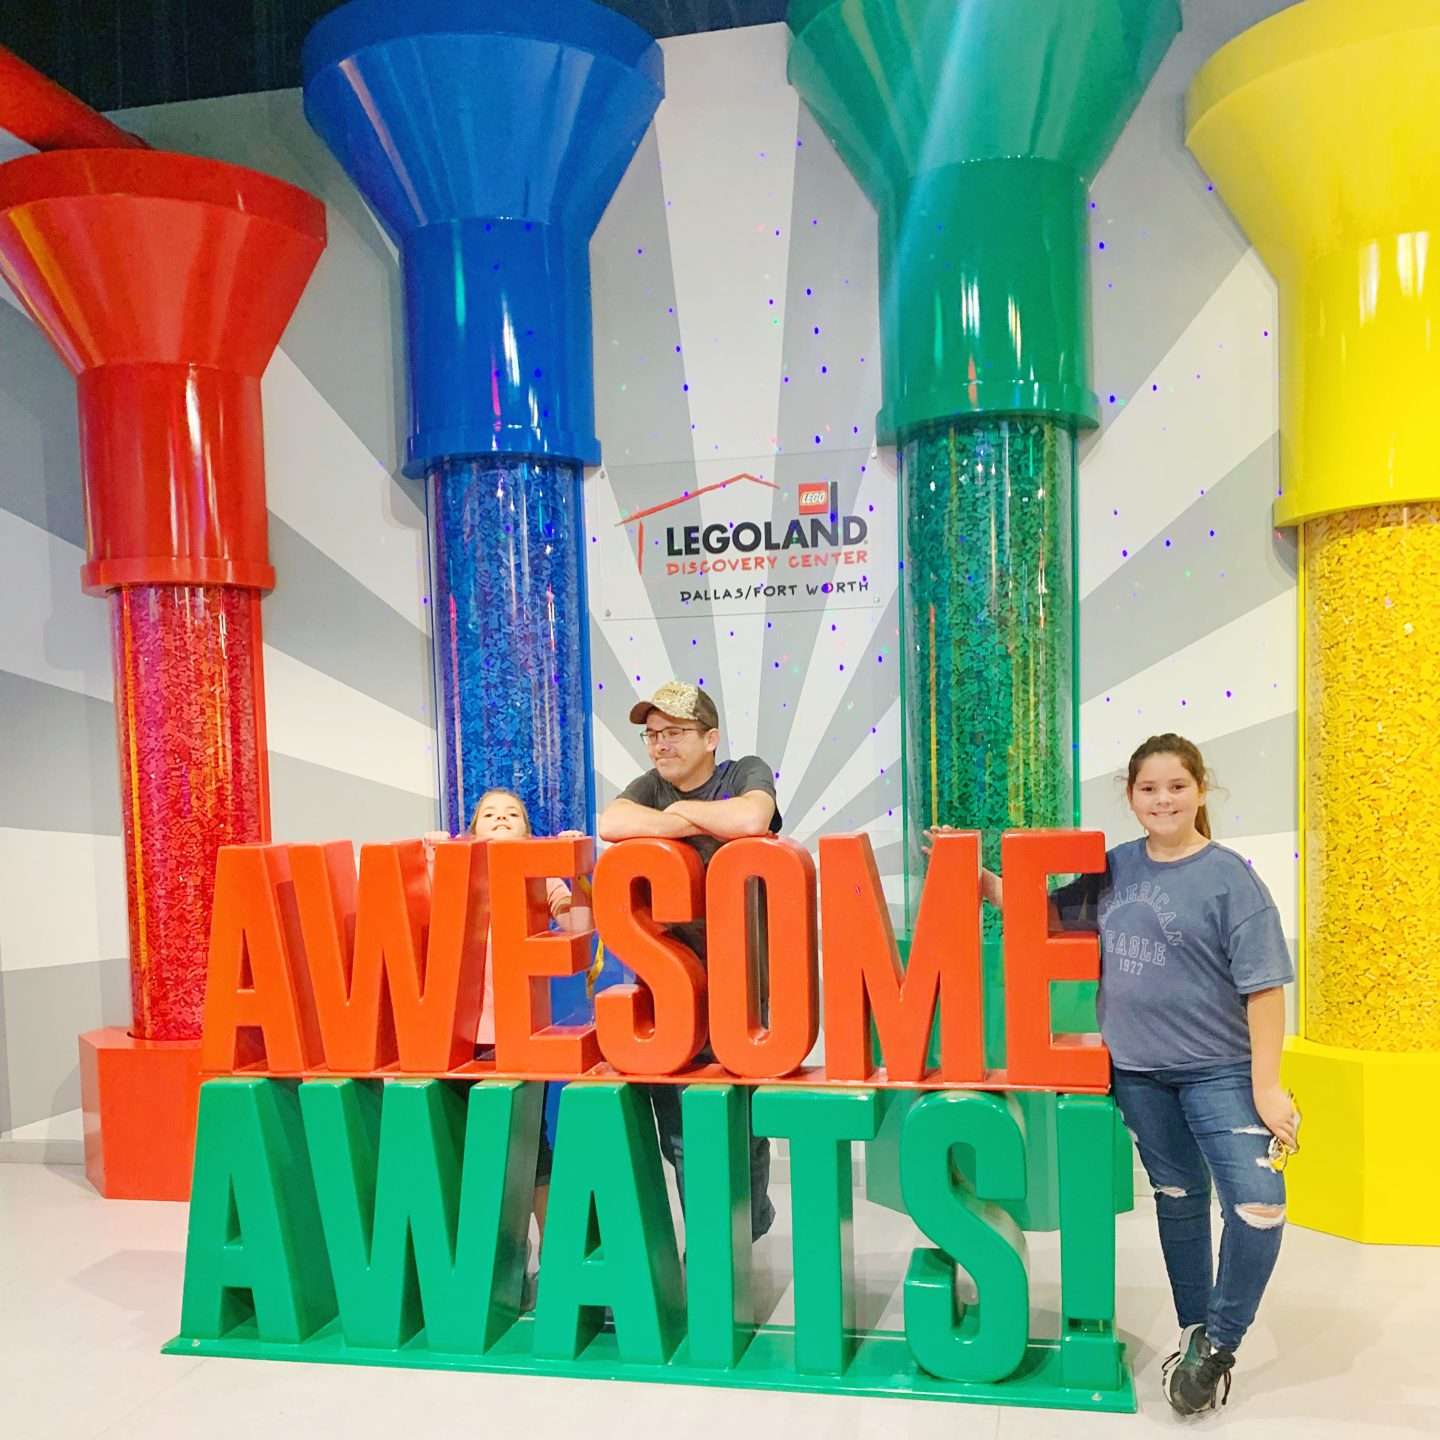 Things to do in Dallas with kids: go to Legoland Discovery Center